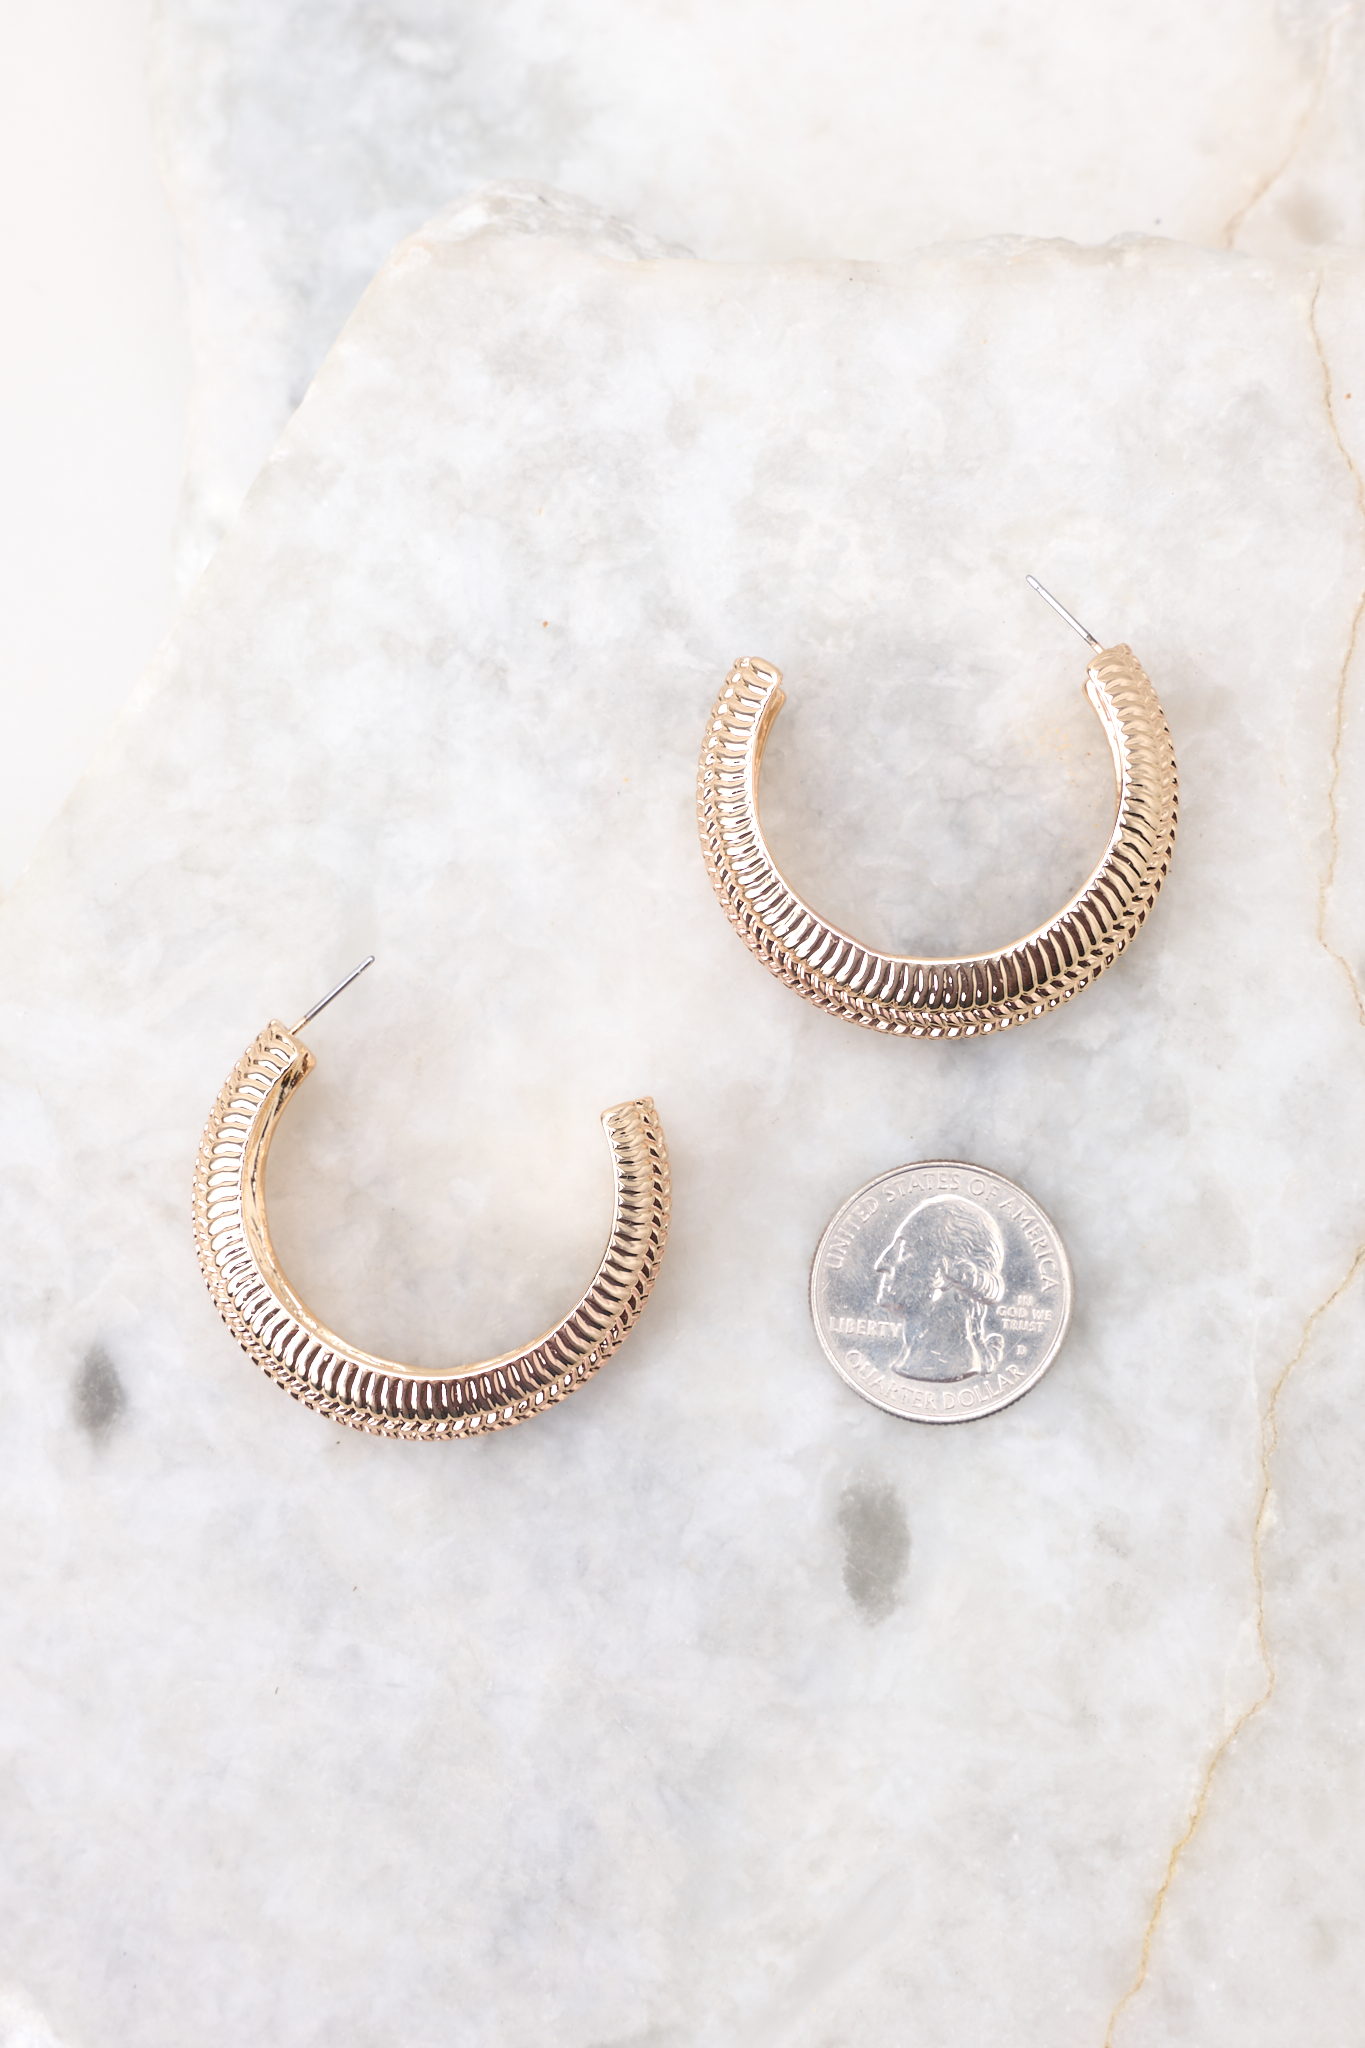 Gold hoop earrings compared to quarter for actual size. 